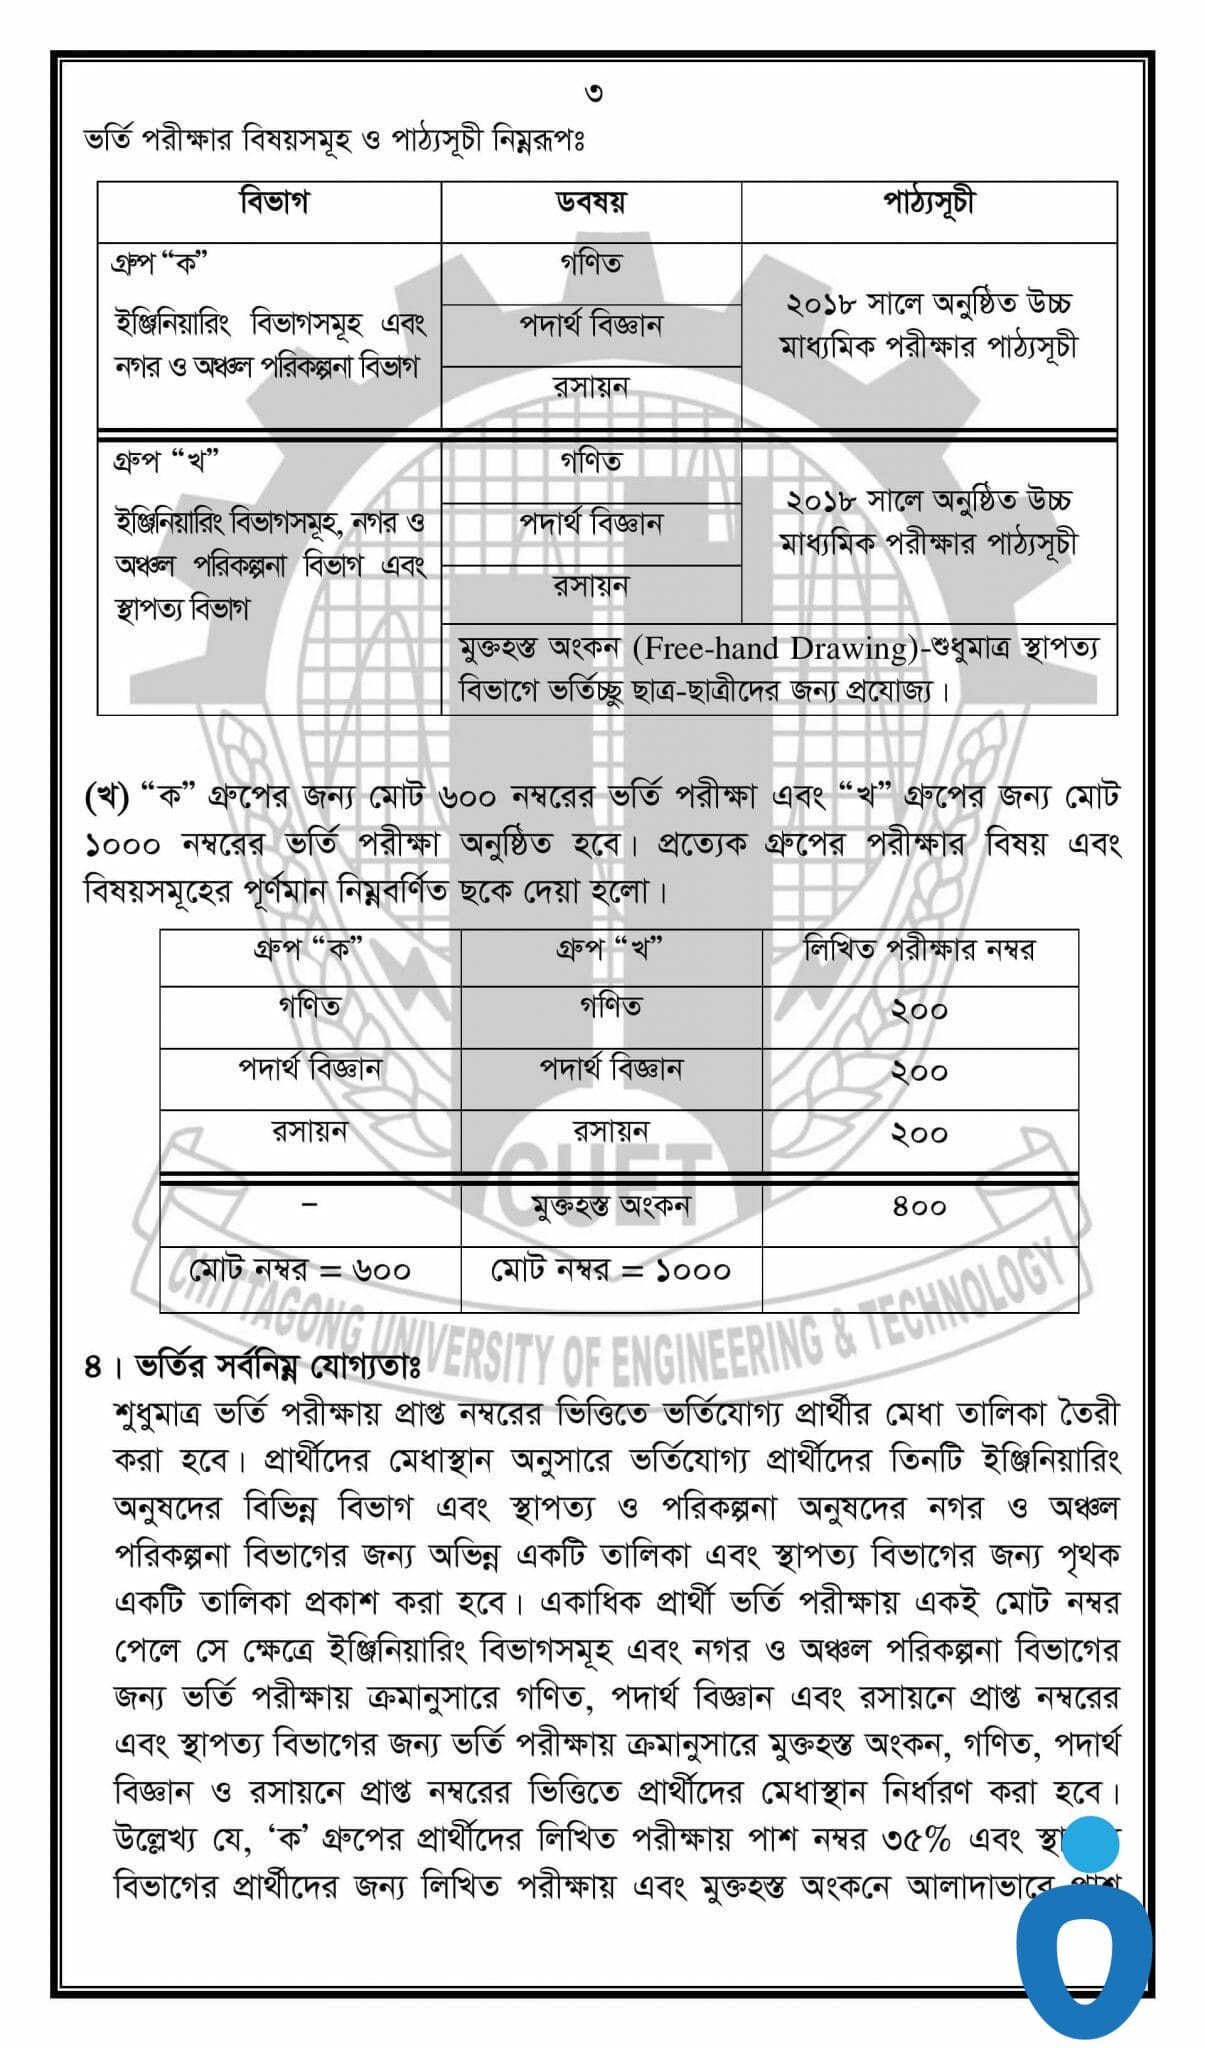 Chittagong University of Engineering and Technology Admission Guideline-2